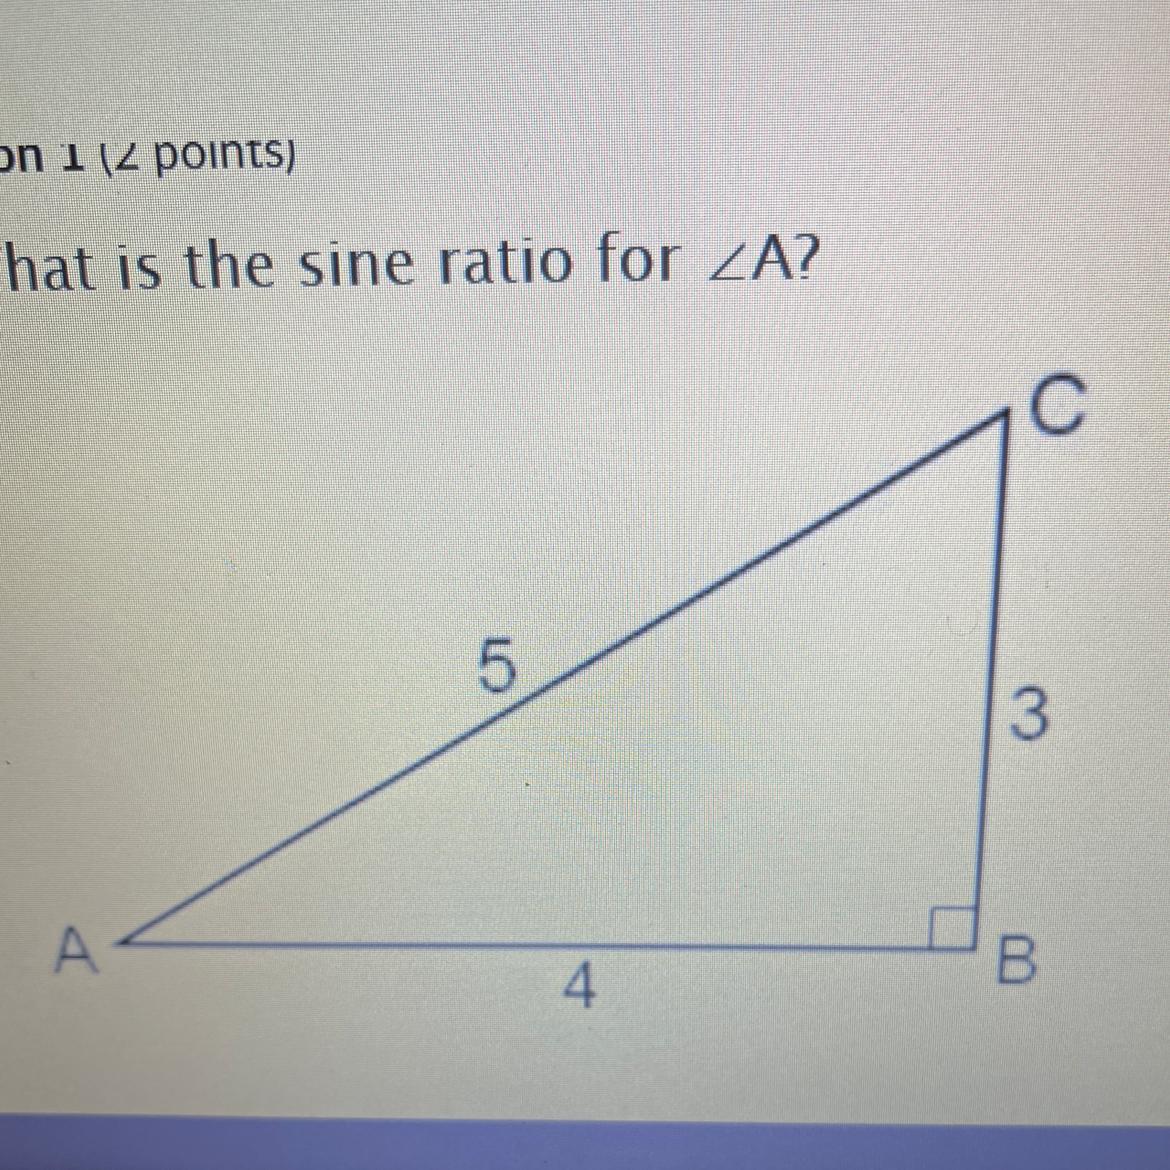 What Is The Sine Ratio For Angle A?A. 5/4B. 4/5C. 3/4D. 3/5